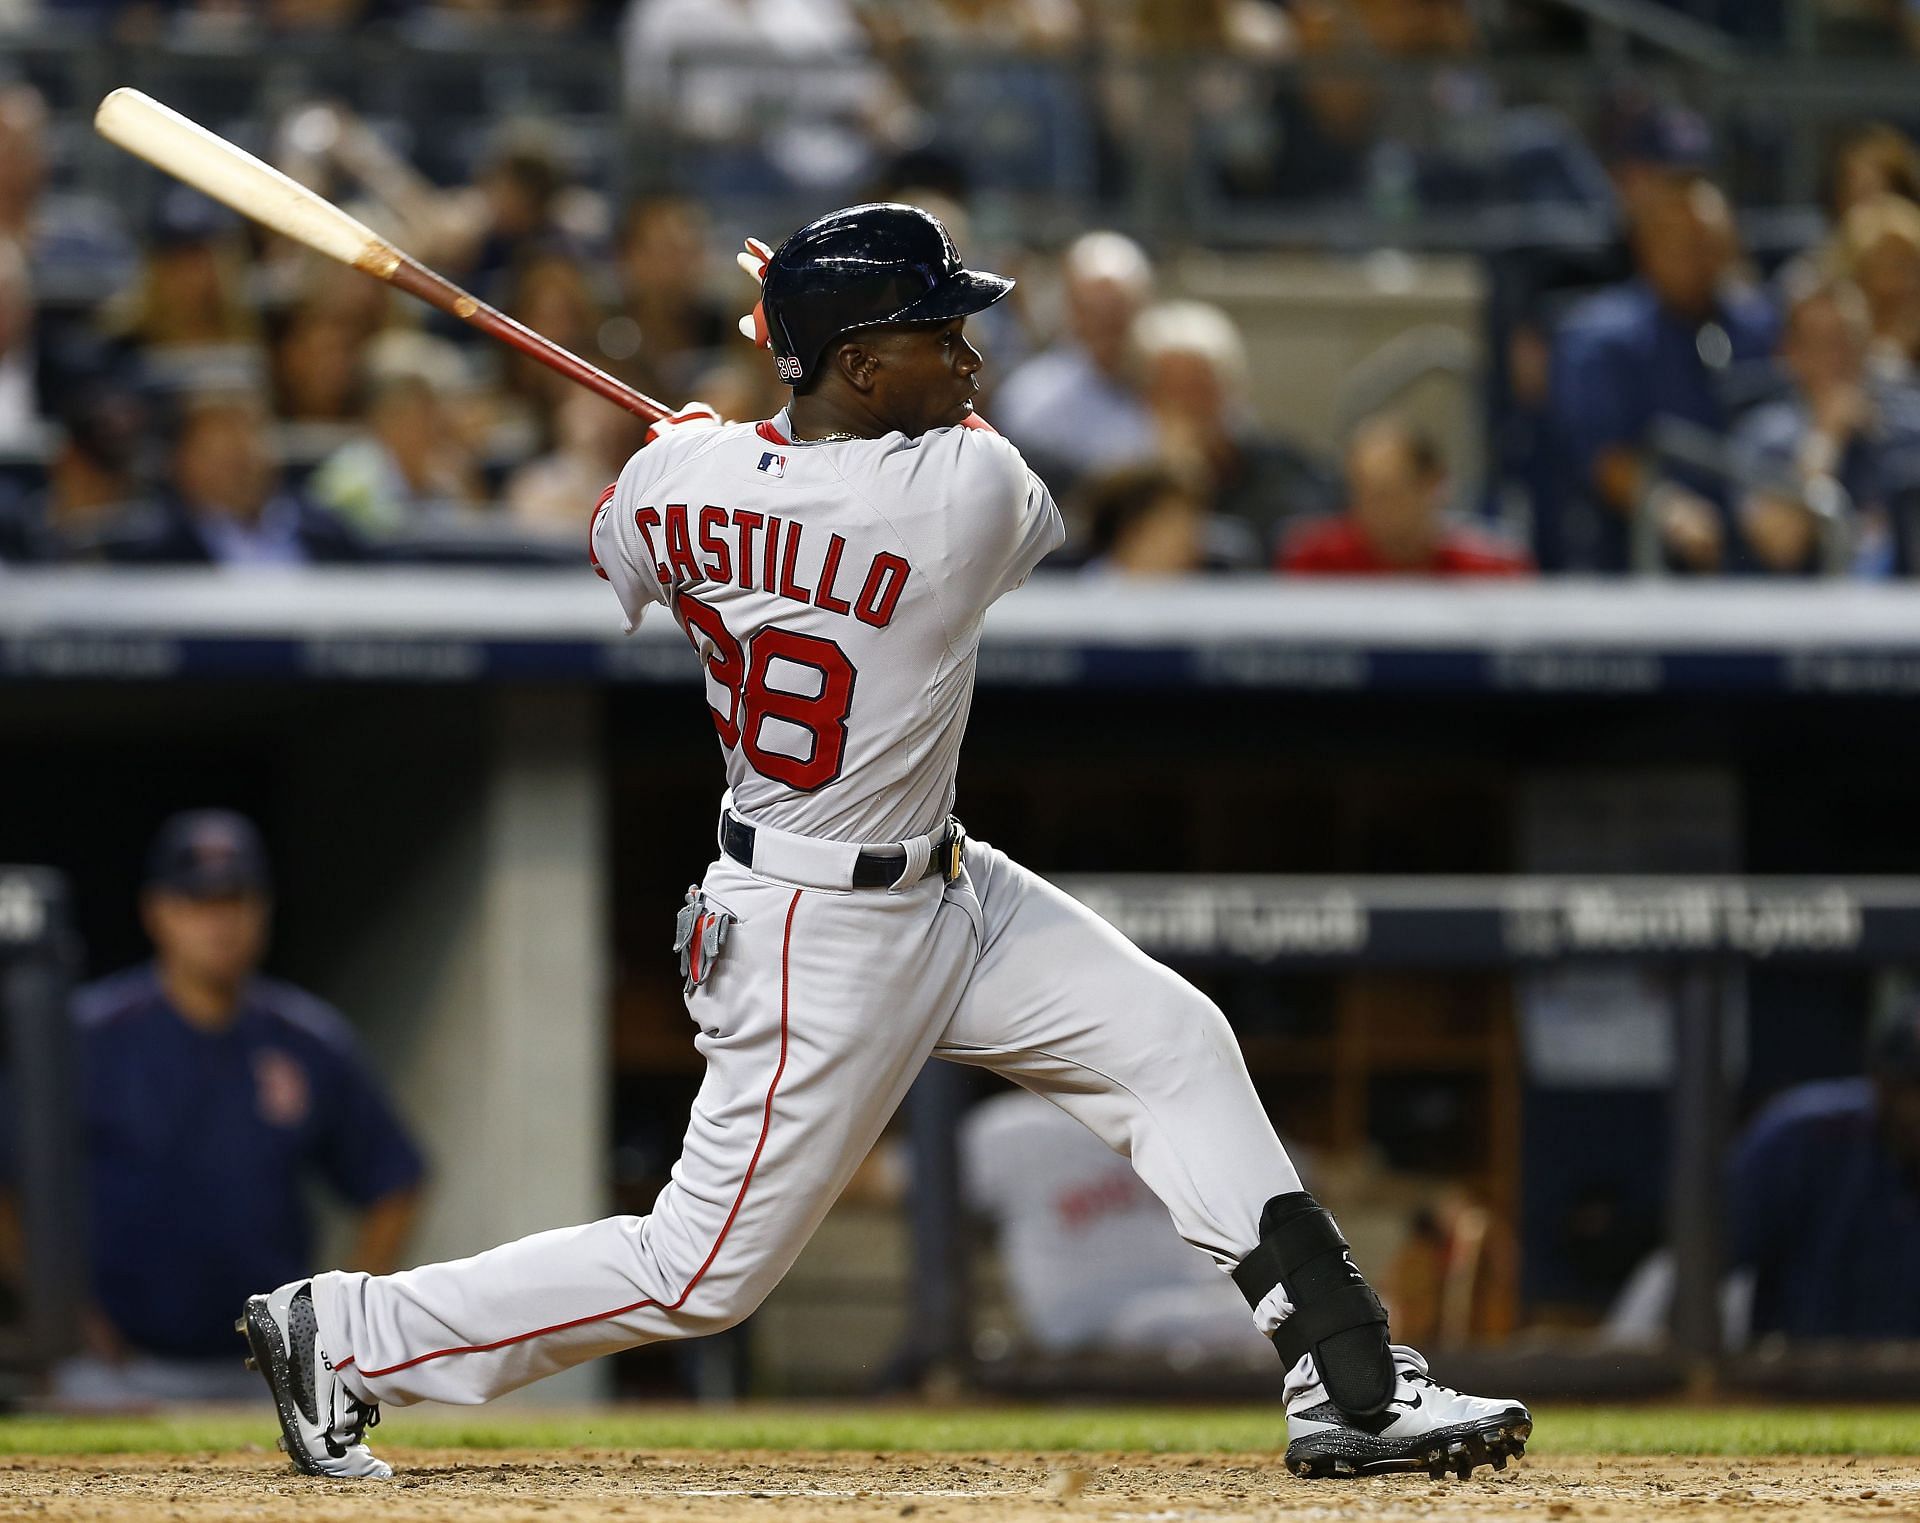 Boston Red Sox outfielder Rusney Castillo was never ready to land such a massive contract in the MLB